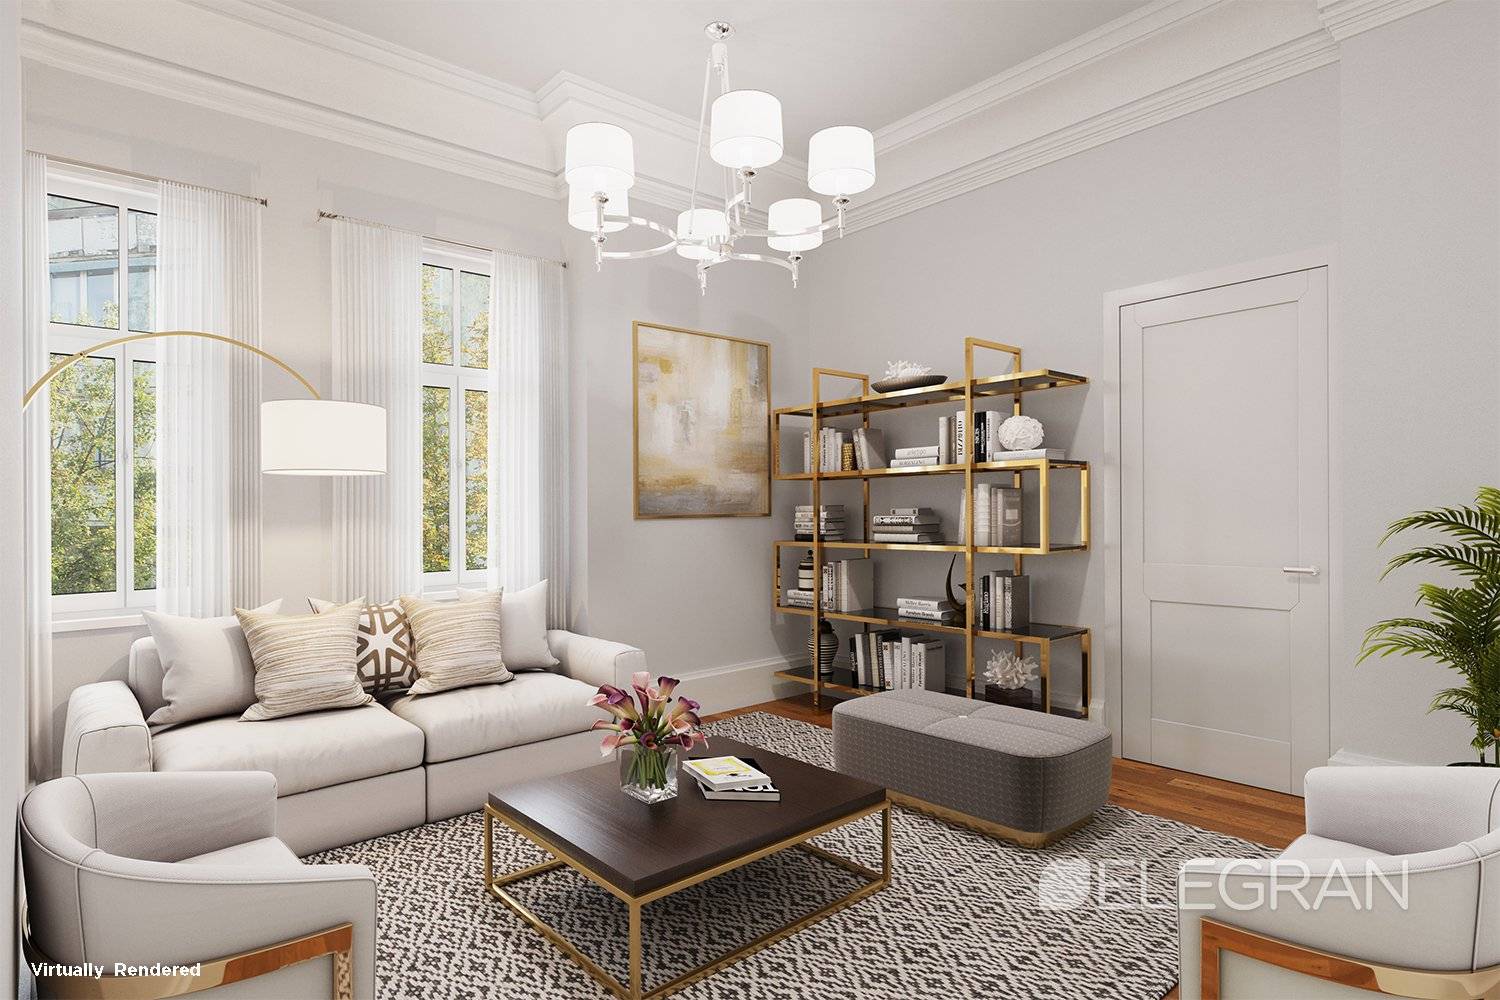 Beautifully restored by an architectural historian, this 1904 Ansonia apartment is a historic timepiece with both new finishes and lovely turn of the century details.